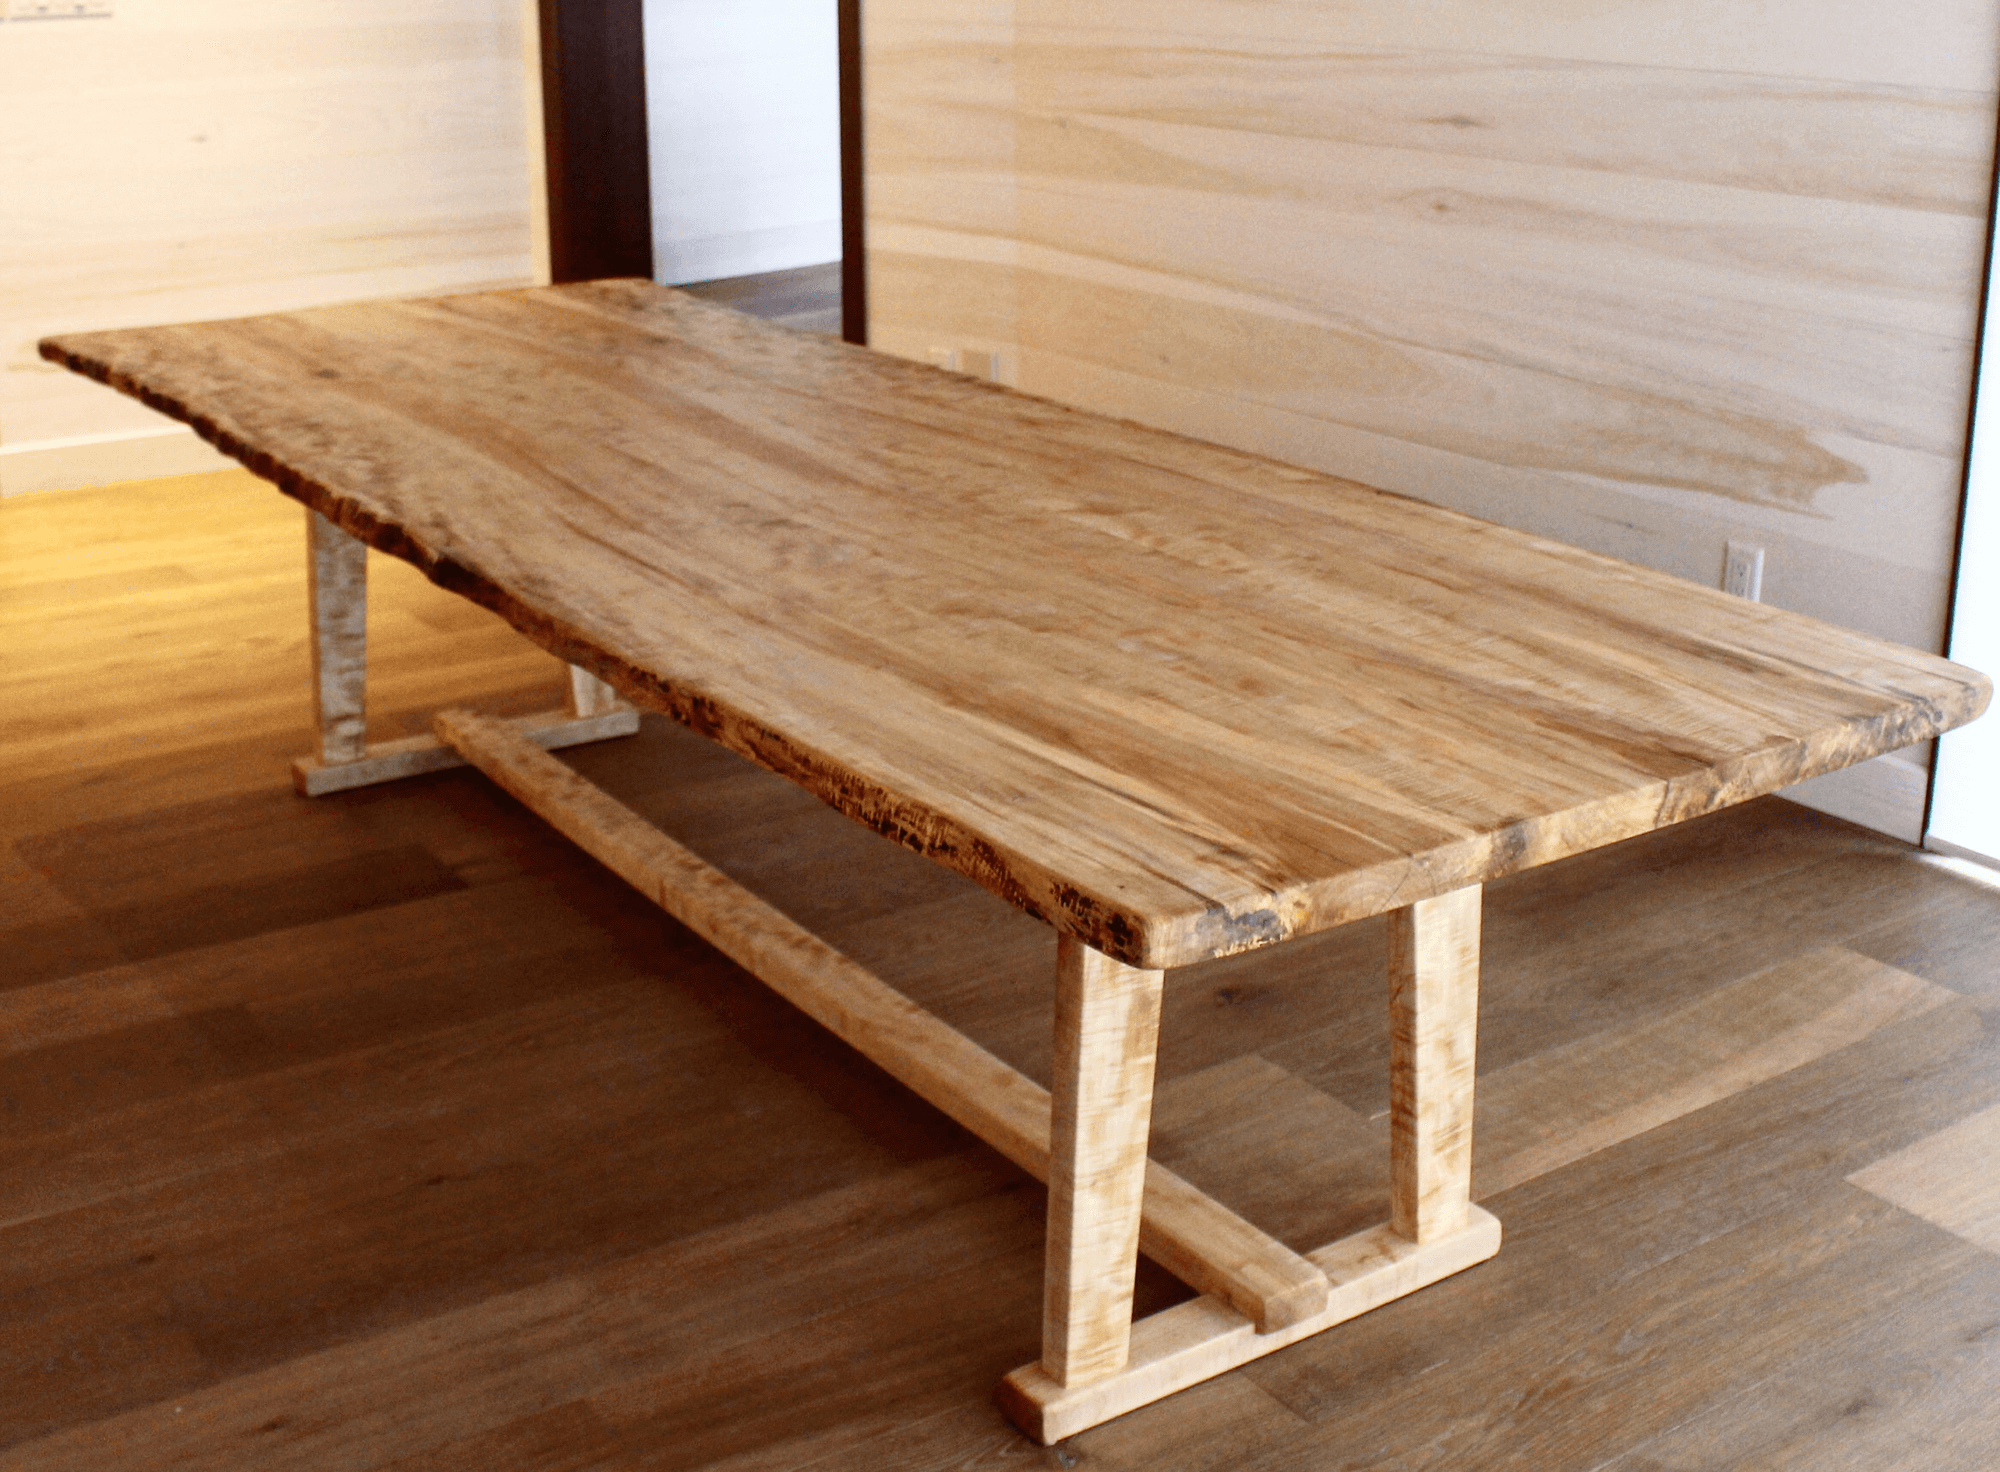 live edge maple table with wood trestle base, made in Muskoka